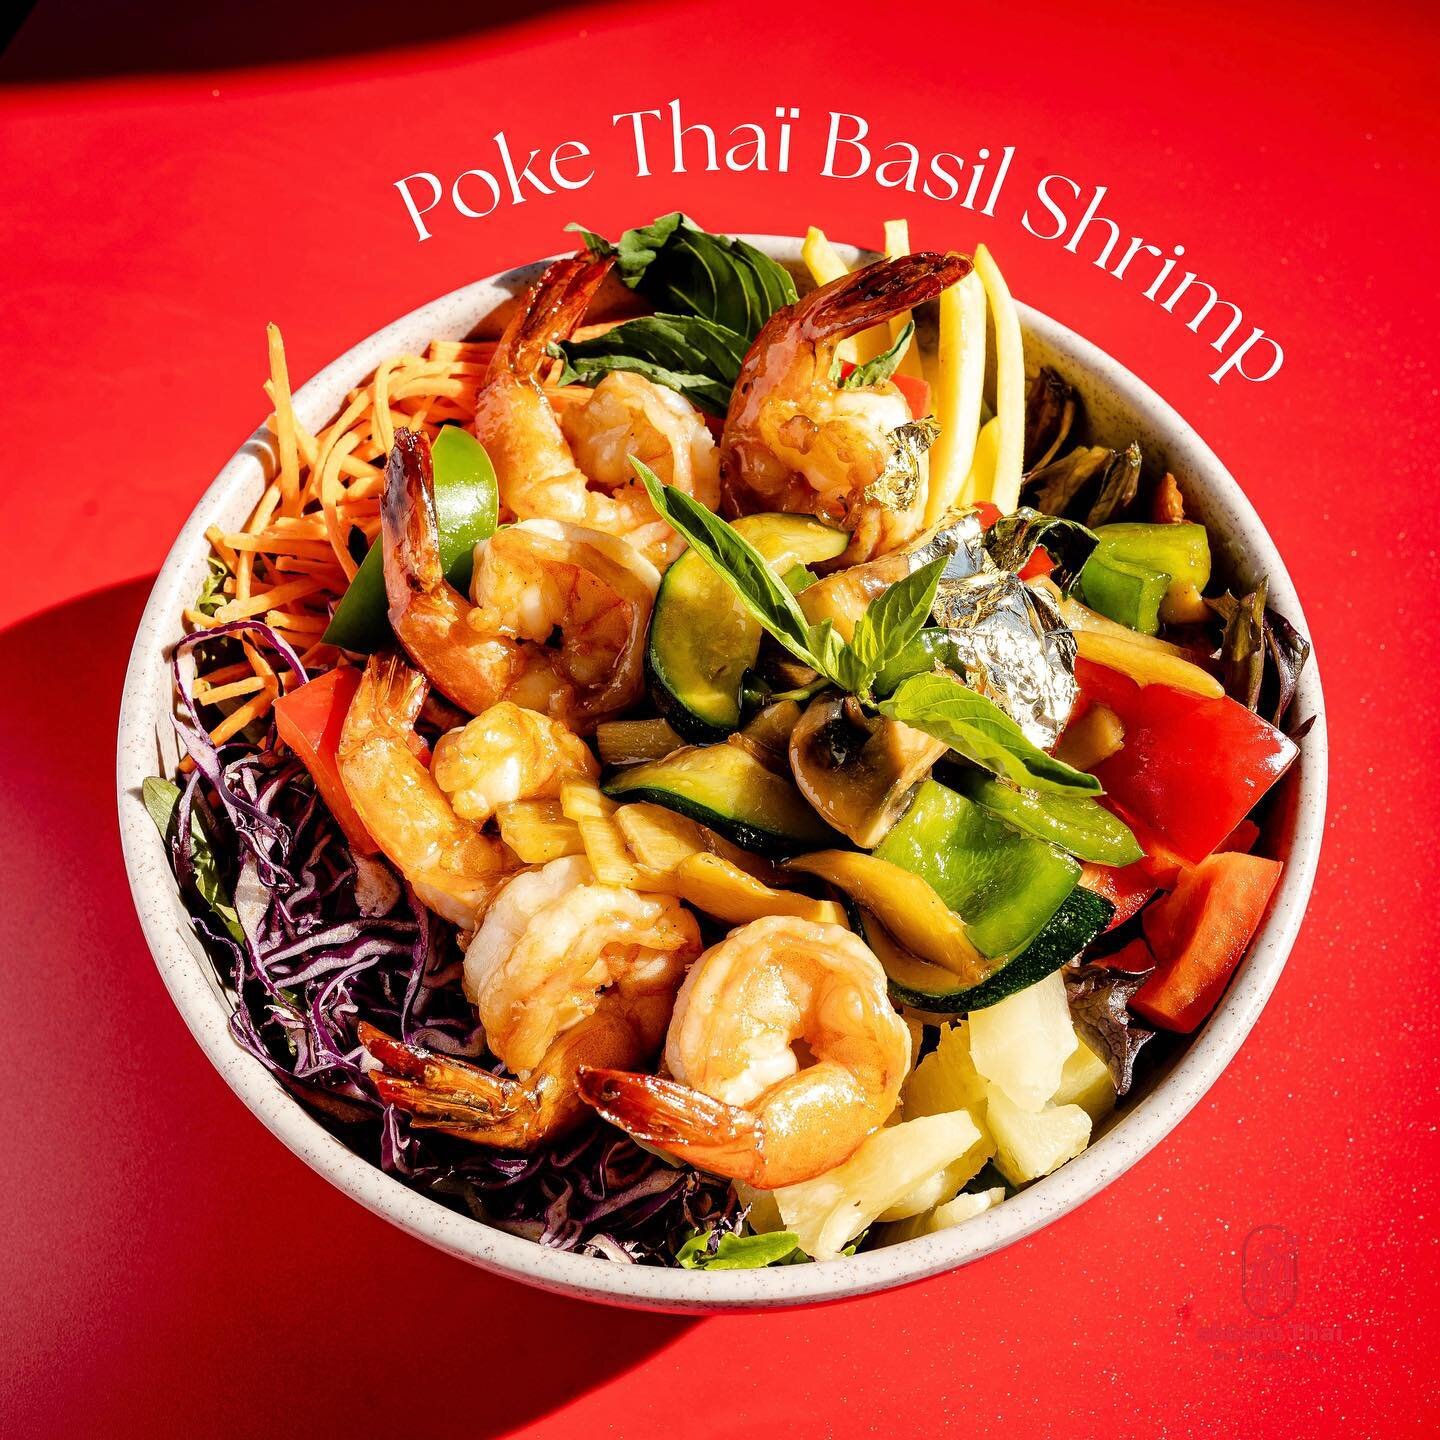 65. Poke Thai Basil Shrimp 🦐 

Healthy poke bowl with plenty of vegetables, topped off with our signature stir-fried basil shrimp!! Very delicious 😋 
.
.
.
.
.
#shushuthai #shushumontreal #thaifood #mtlthaifood #mtlmoments #mtlfoodie #mtlfood #mtlb